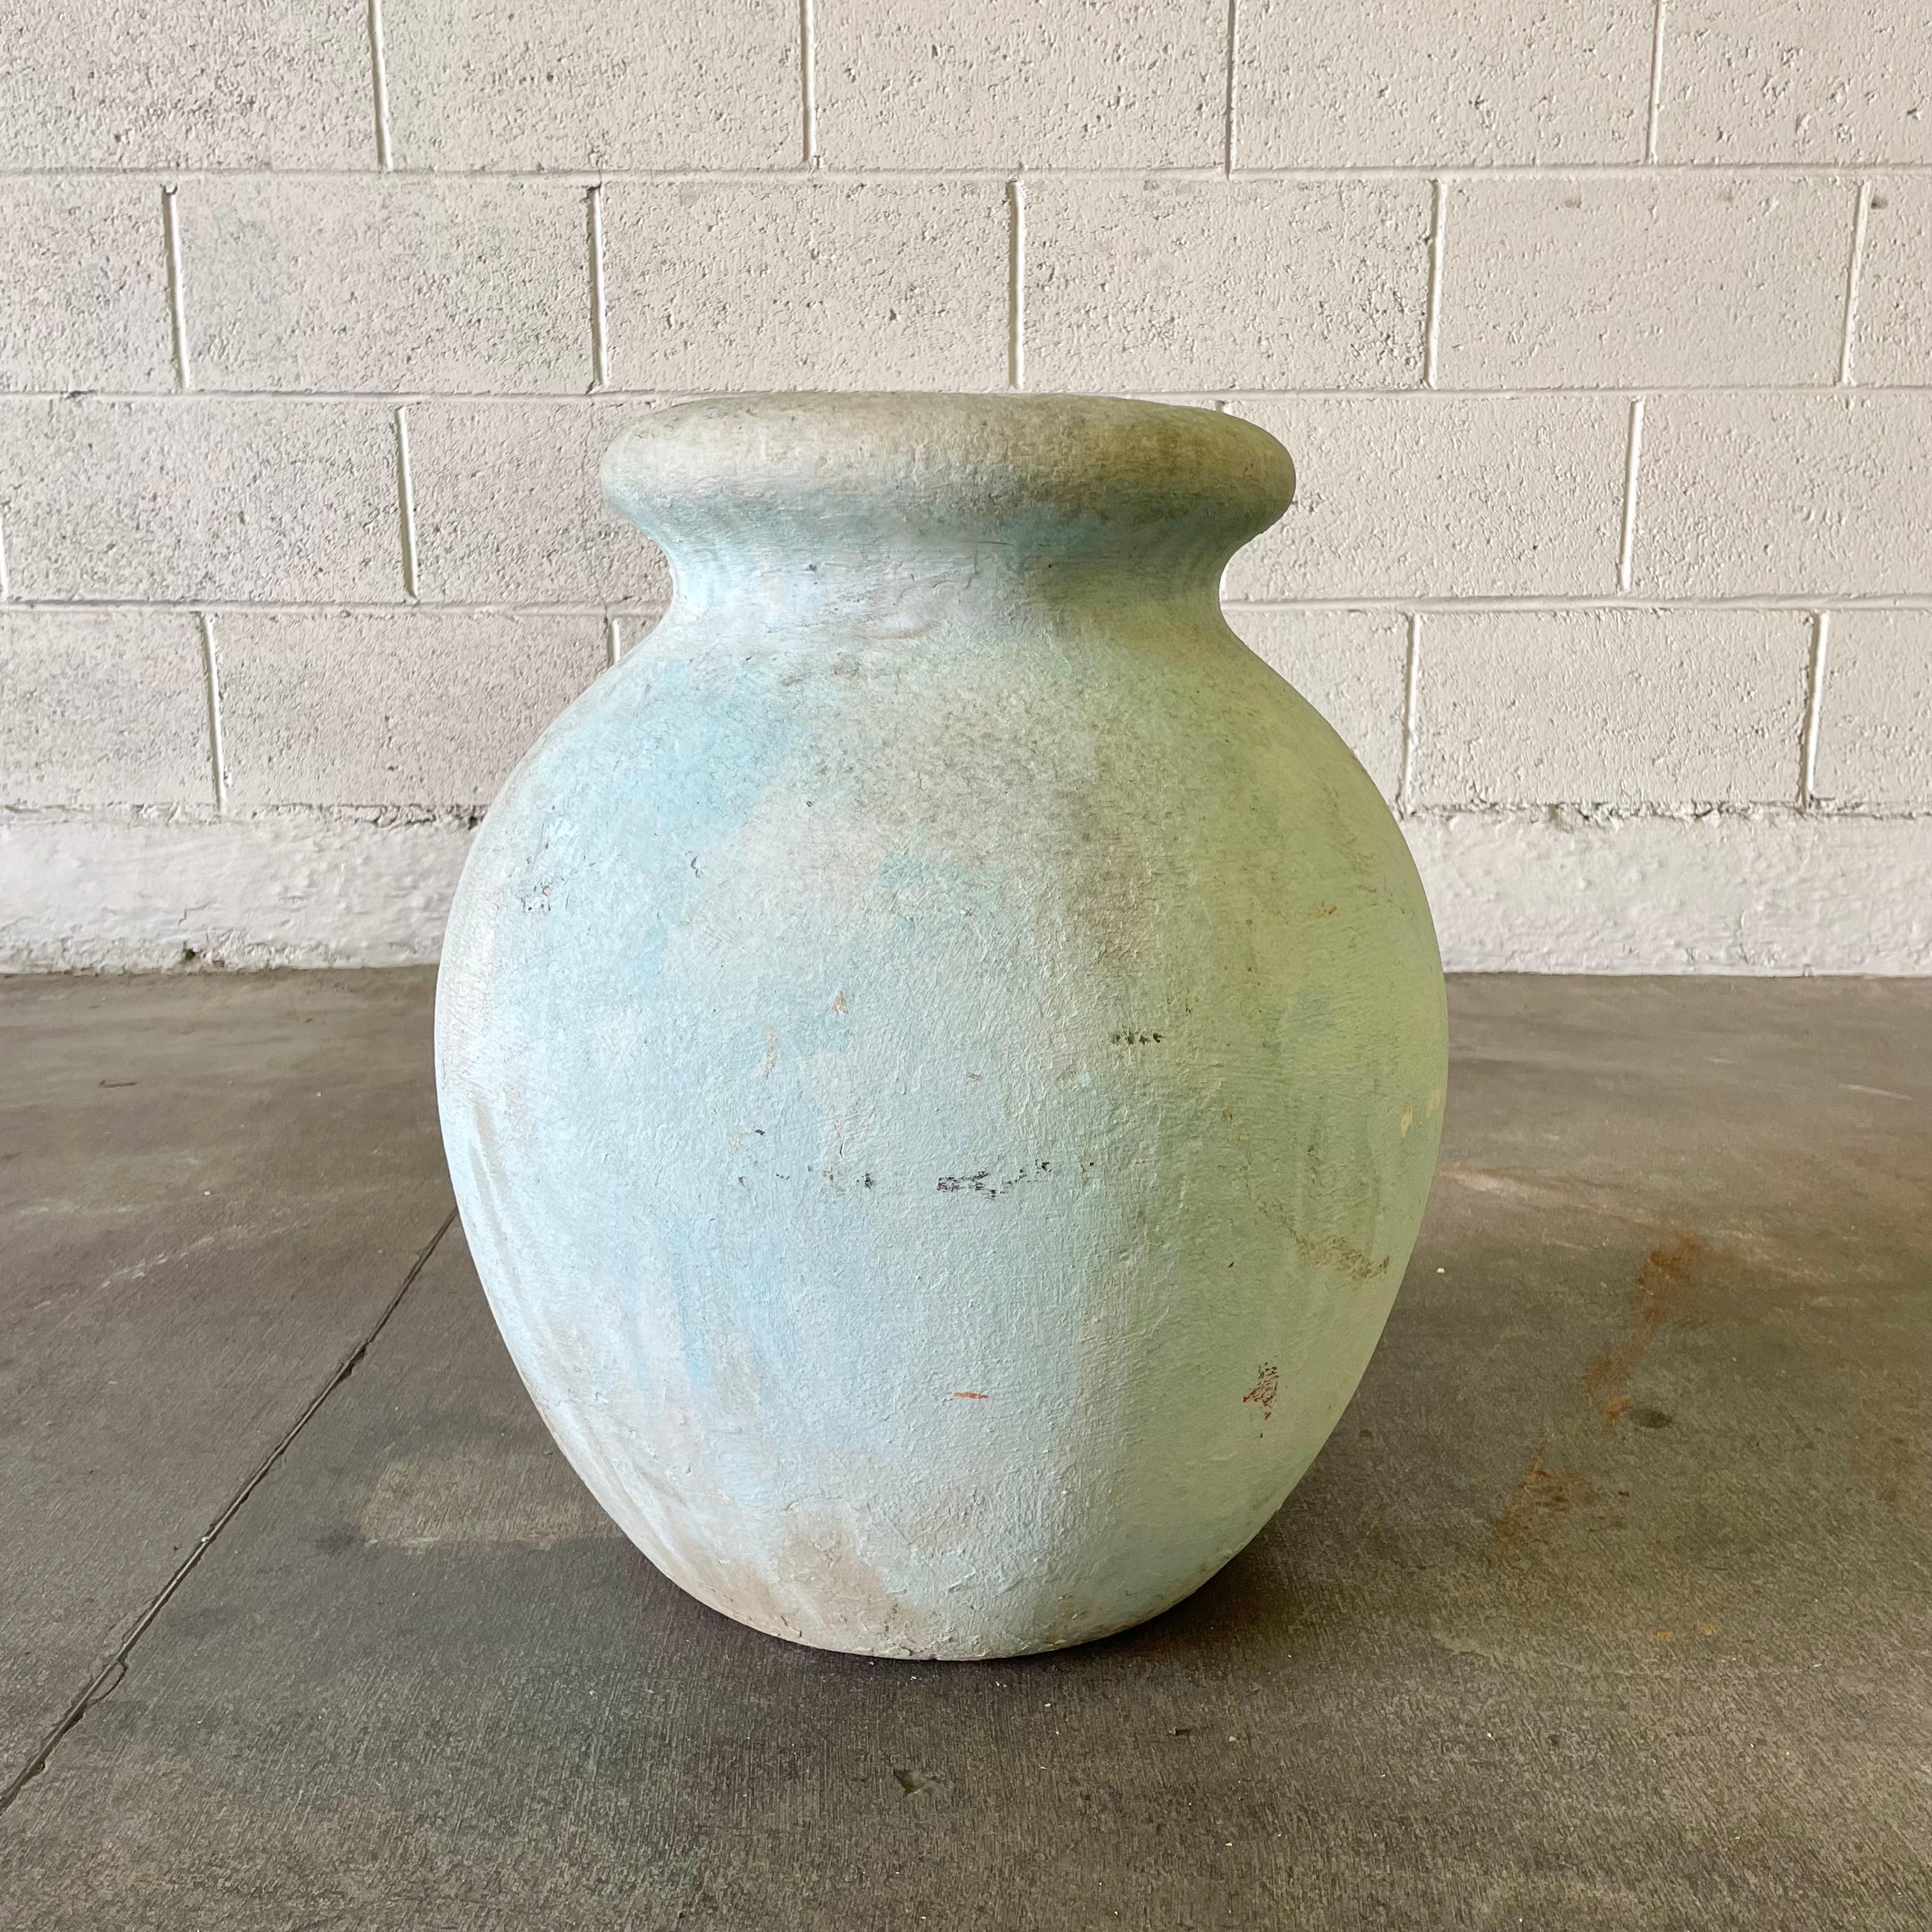 Concrete olive jar planter by Willy Guhl, with great patina and prominent presence. Beautiful pastel blue patina. Simple and elegant design perfect for any garden or patio. Excellent vintage condition. 

Mouth opening measures 8.5